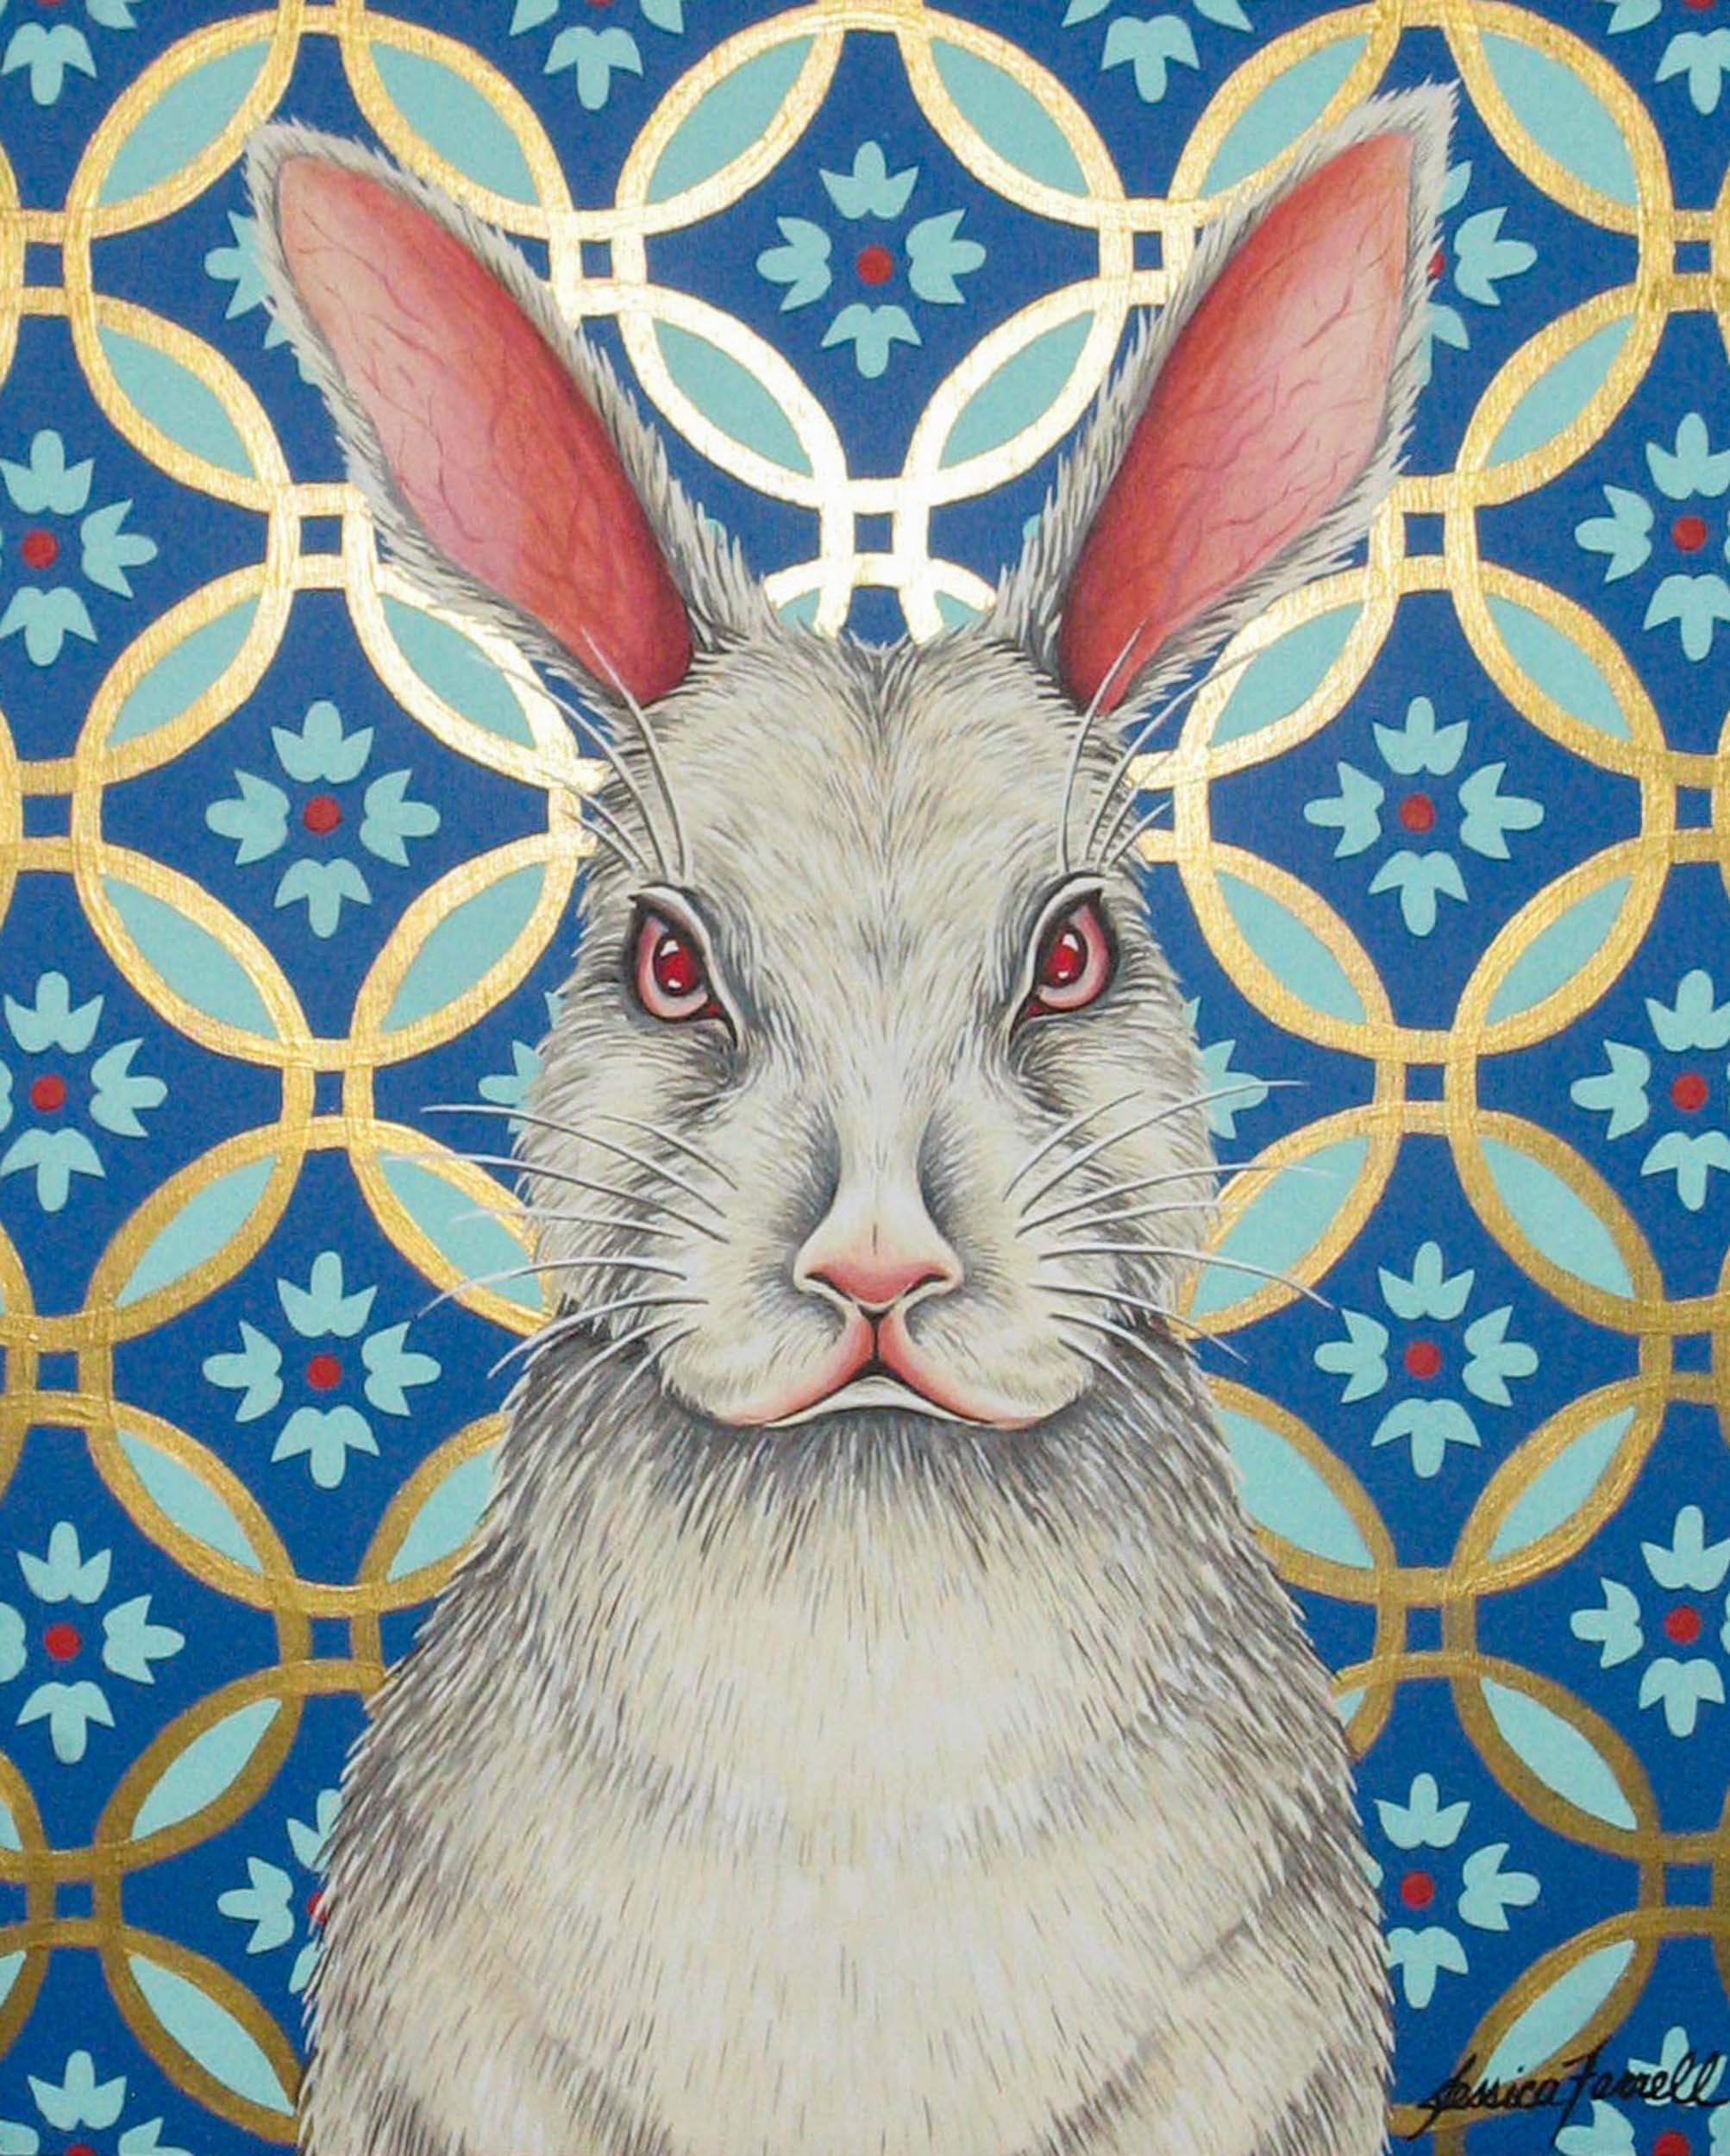   White Rabbit 2, A crylic on wood, 13 x 11 inches  (private collection) 